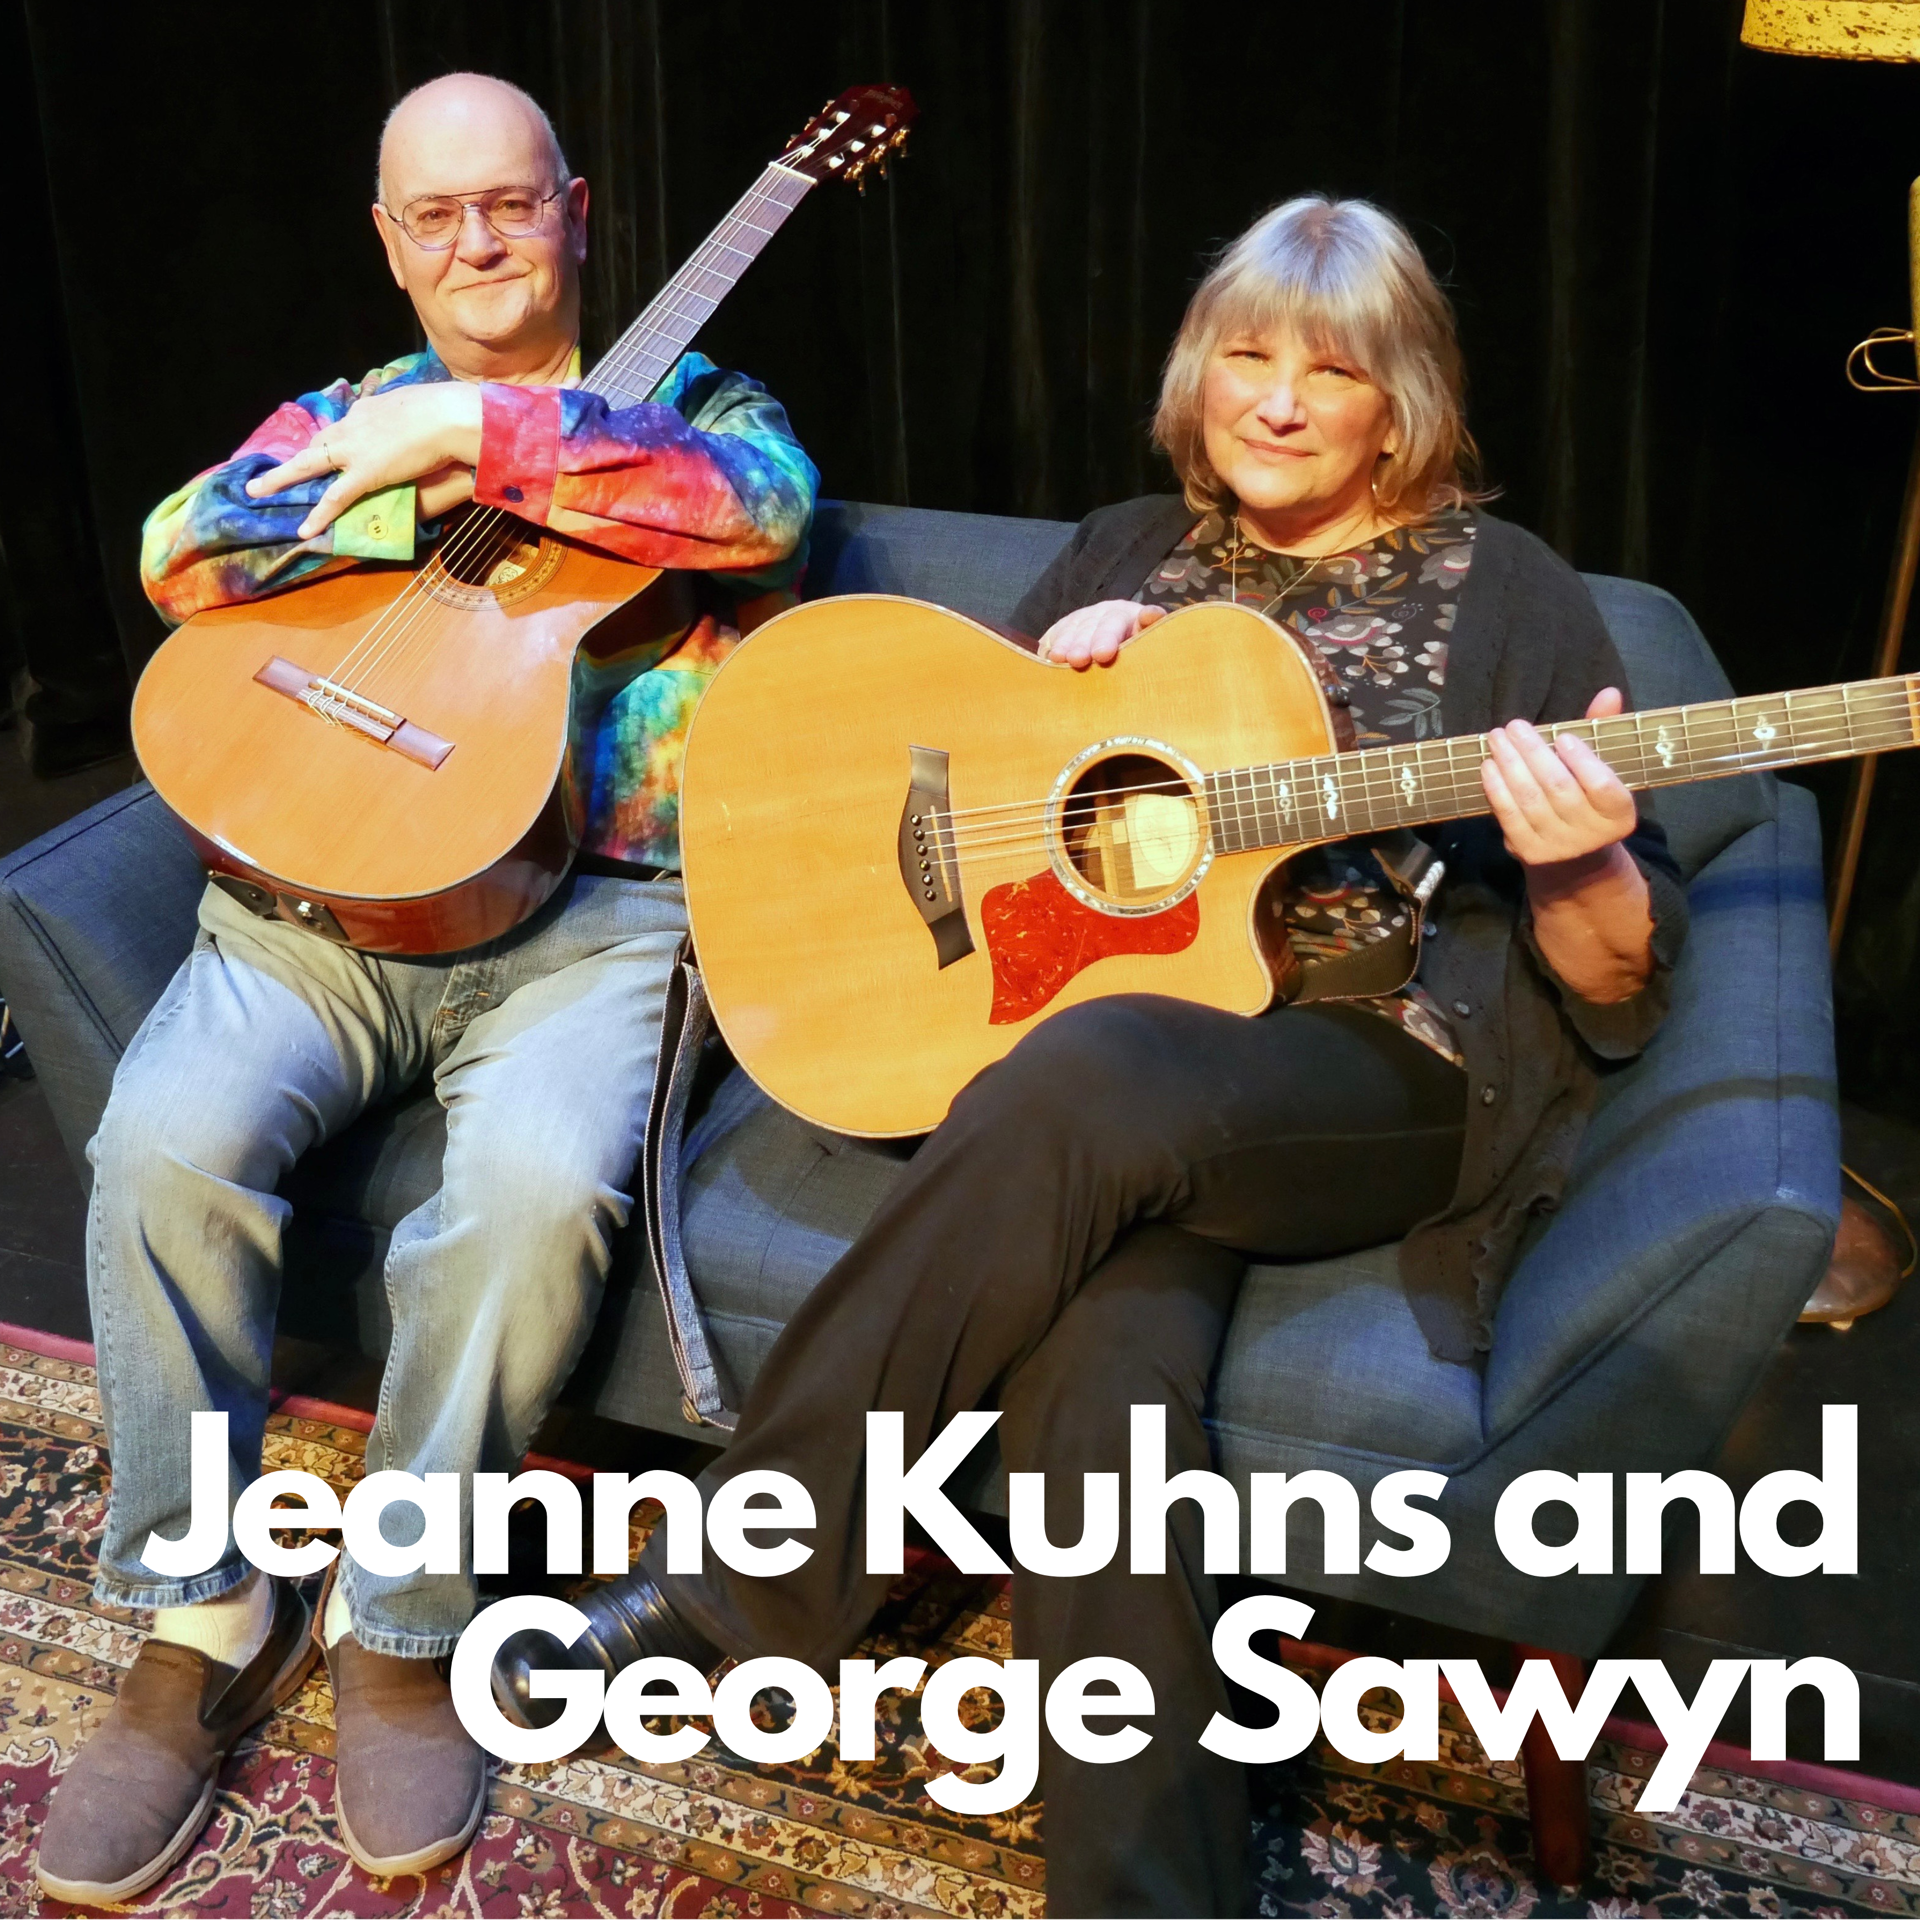 Jeanne Kuhns and George Sawyn, August 25th